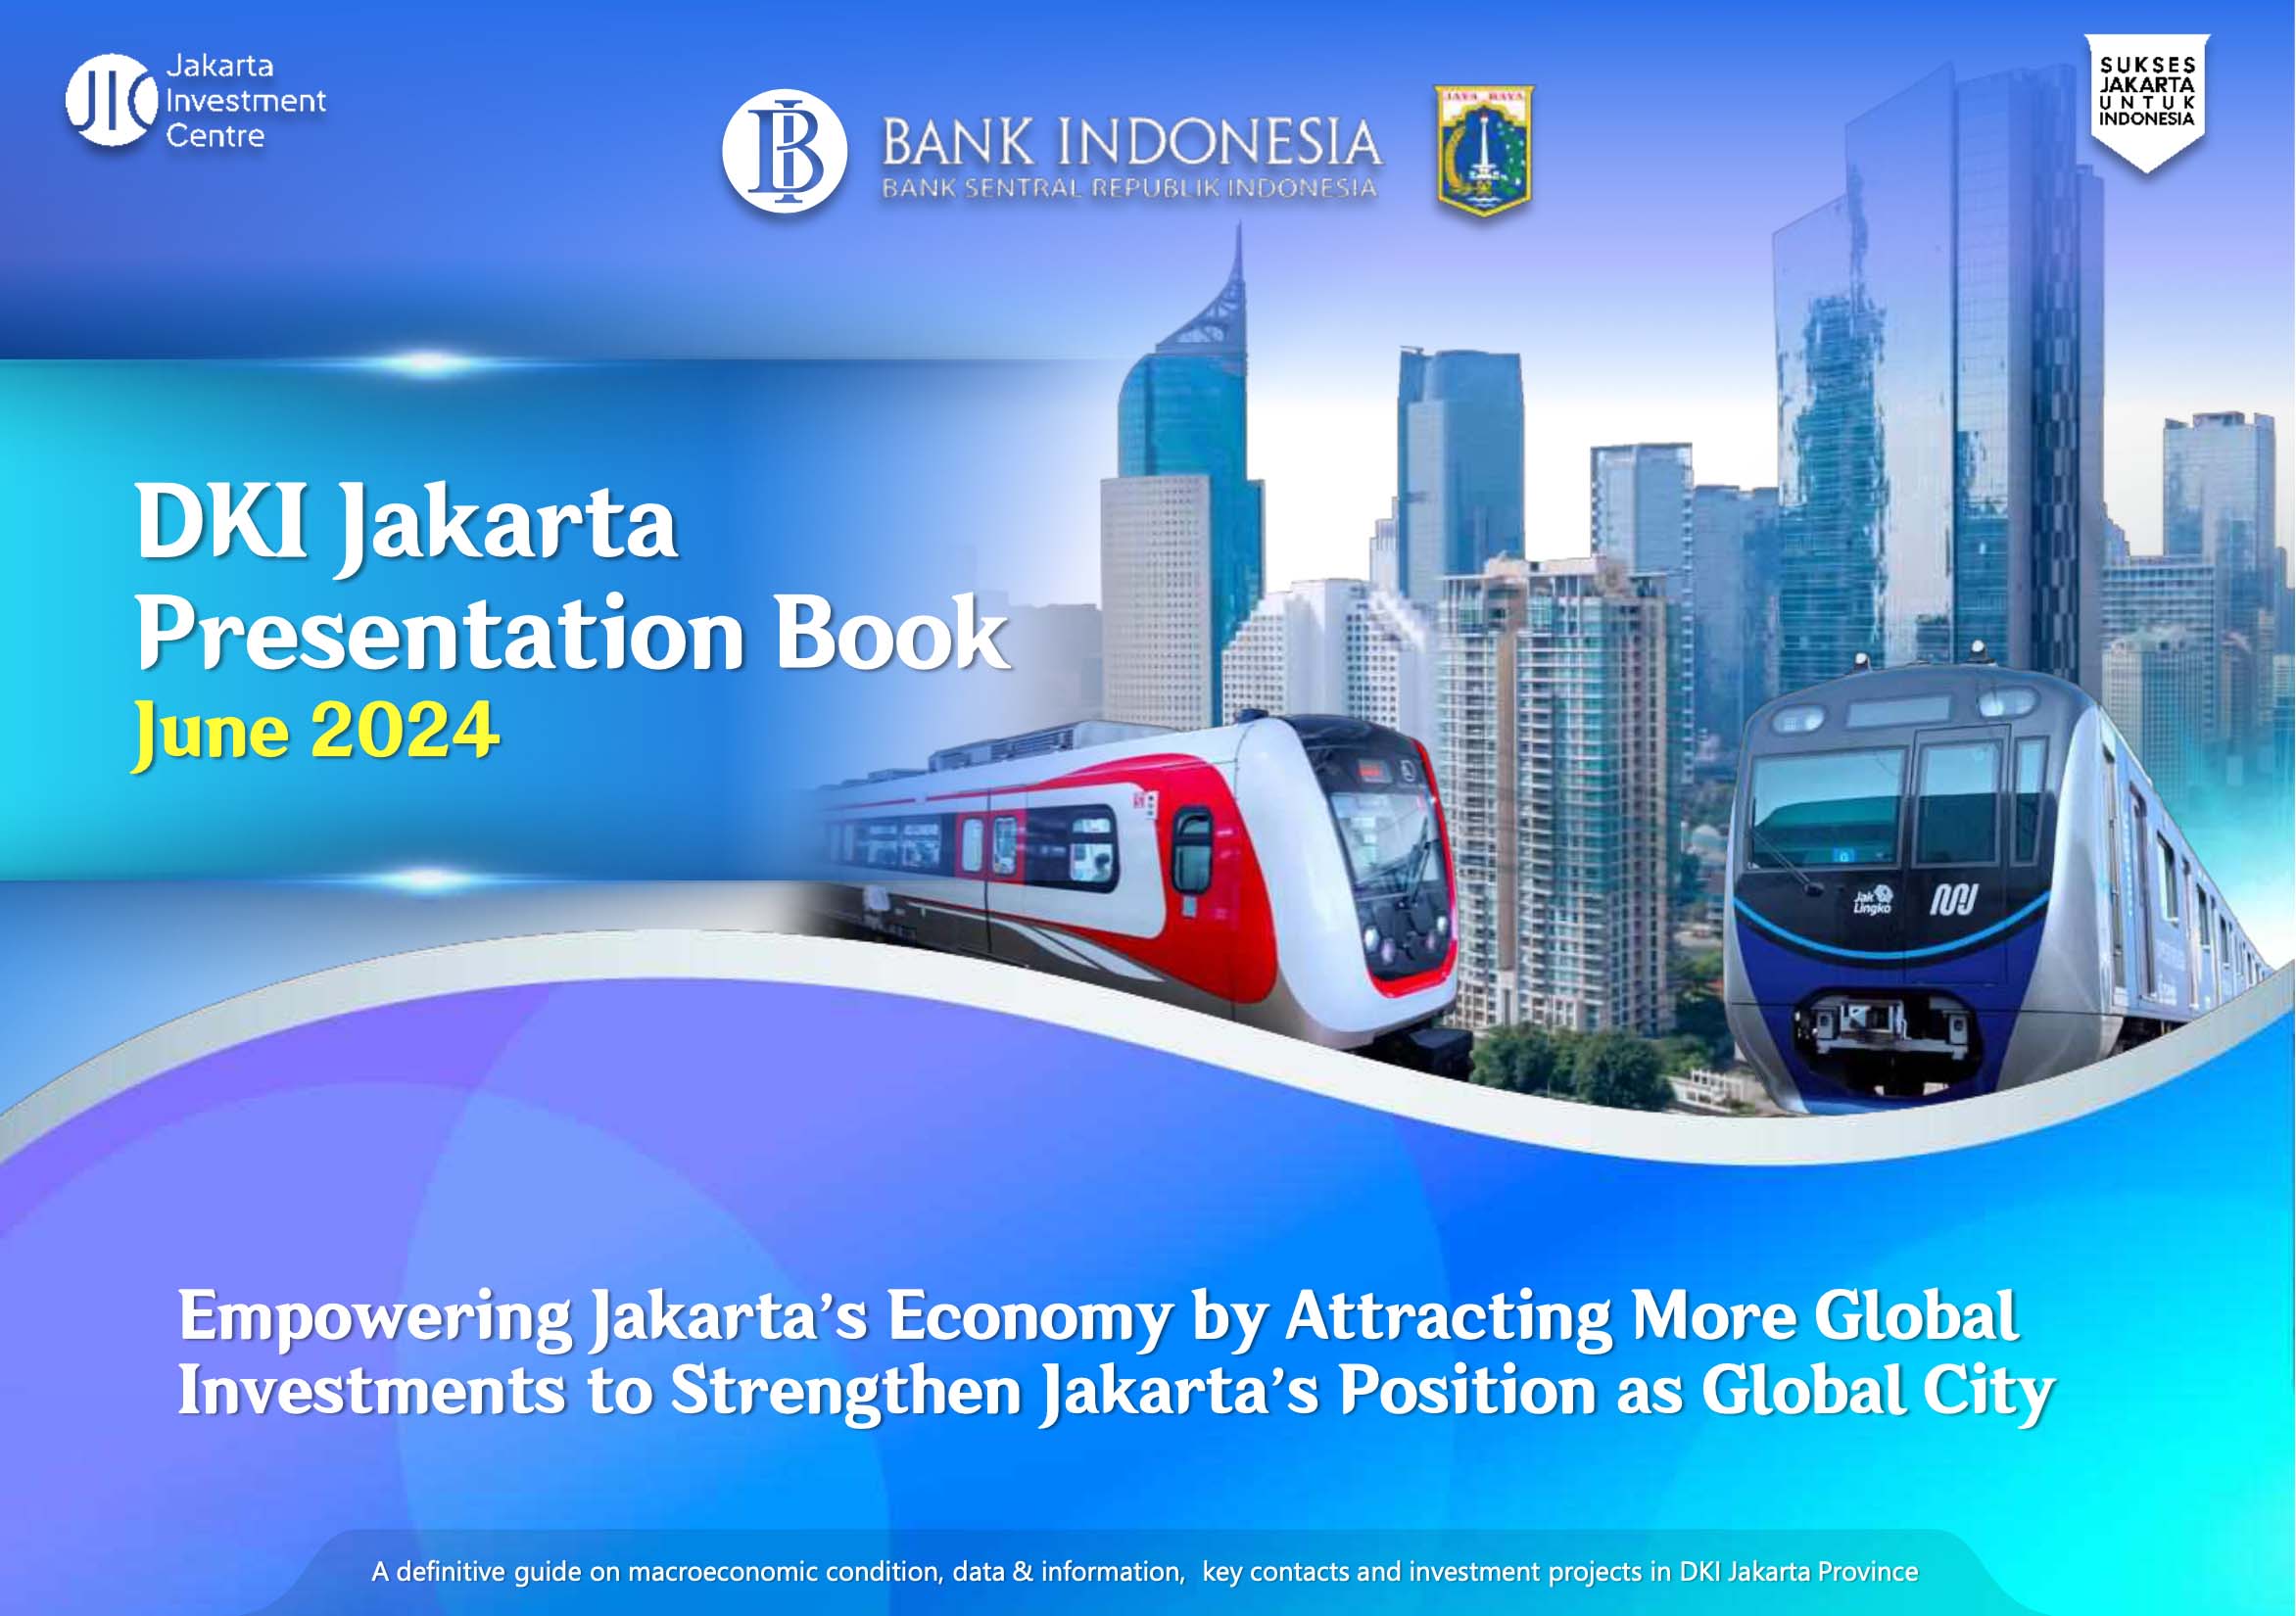 DKI Jakarta Presentation Book June 2024 - Empowering Jakarta’s Economy by Attracting More Global Investments to Strengthen Jakarta’s Position as Global City